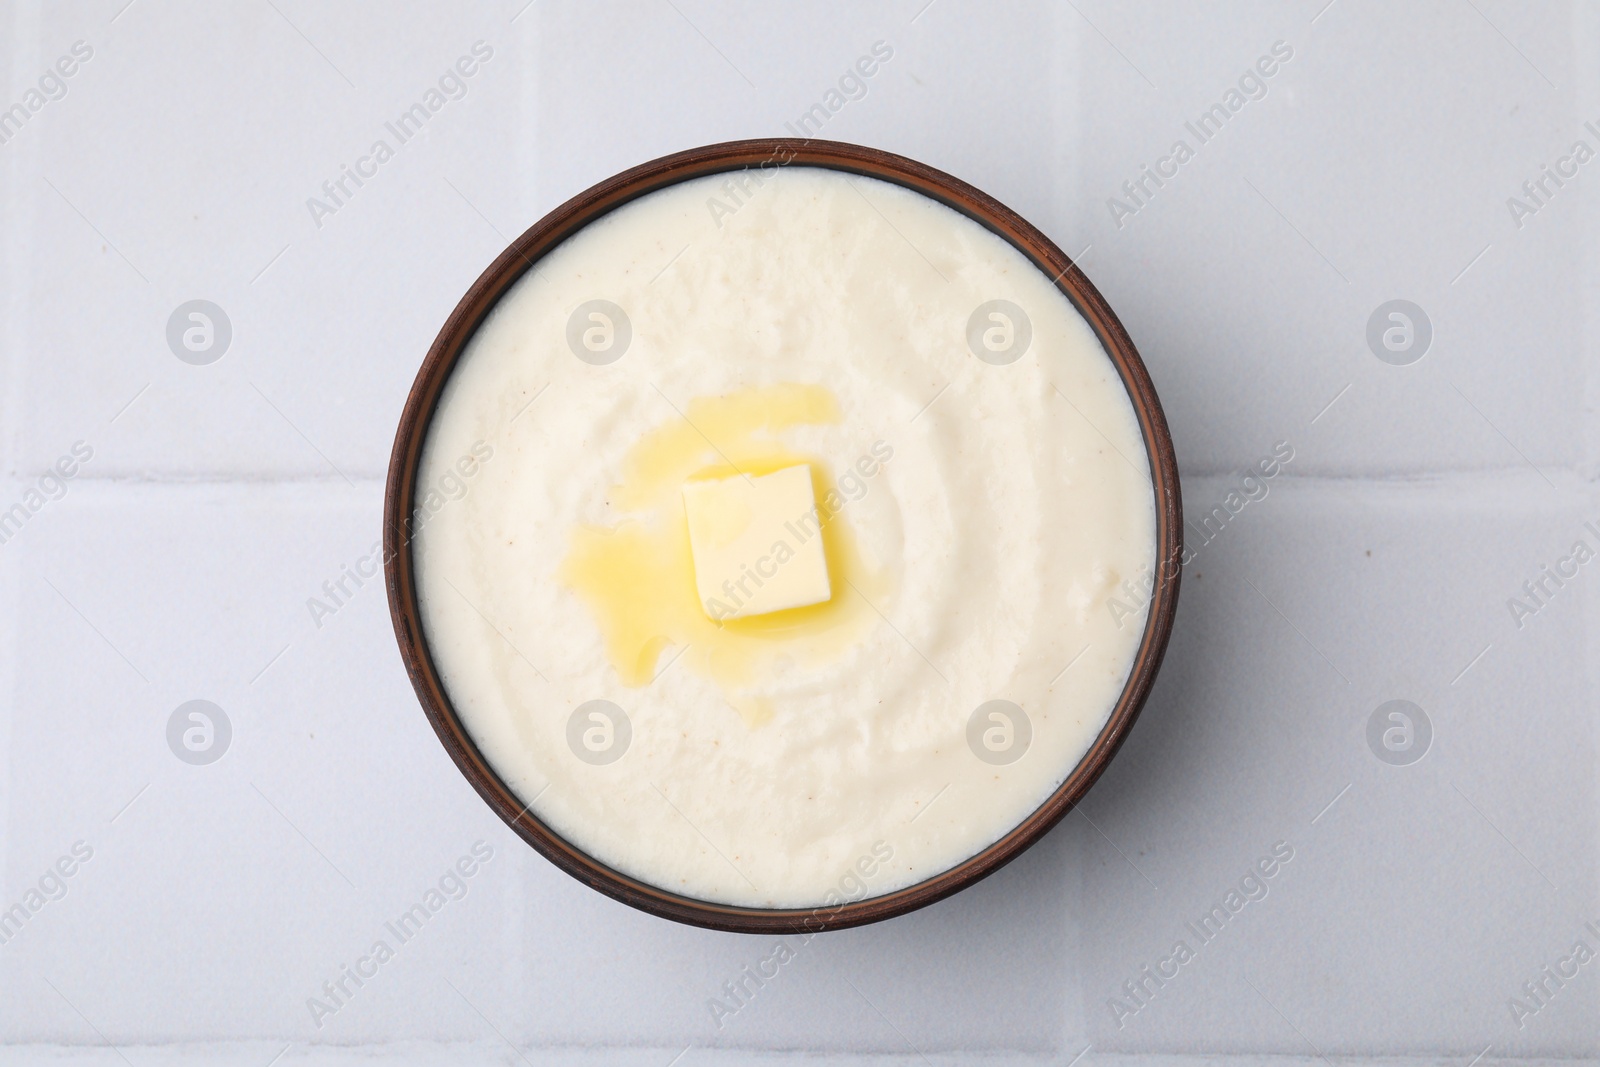 Photo of Delicious semolina pudding with butter in bowl on white tiled table, top view